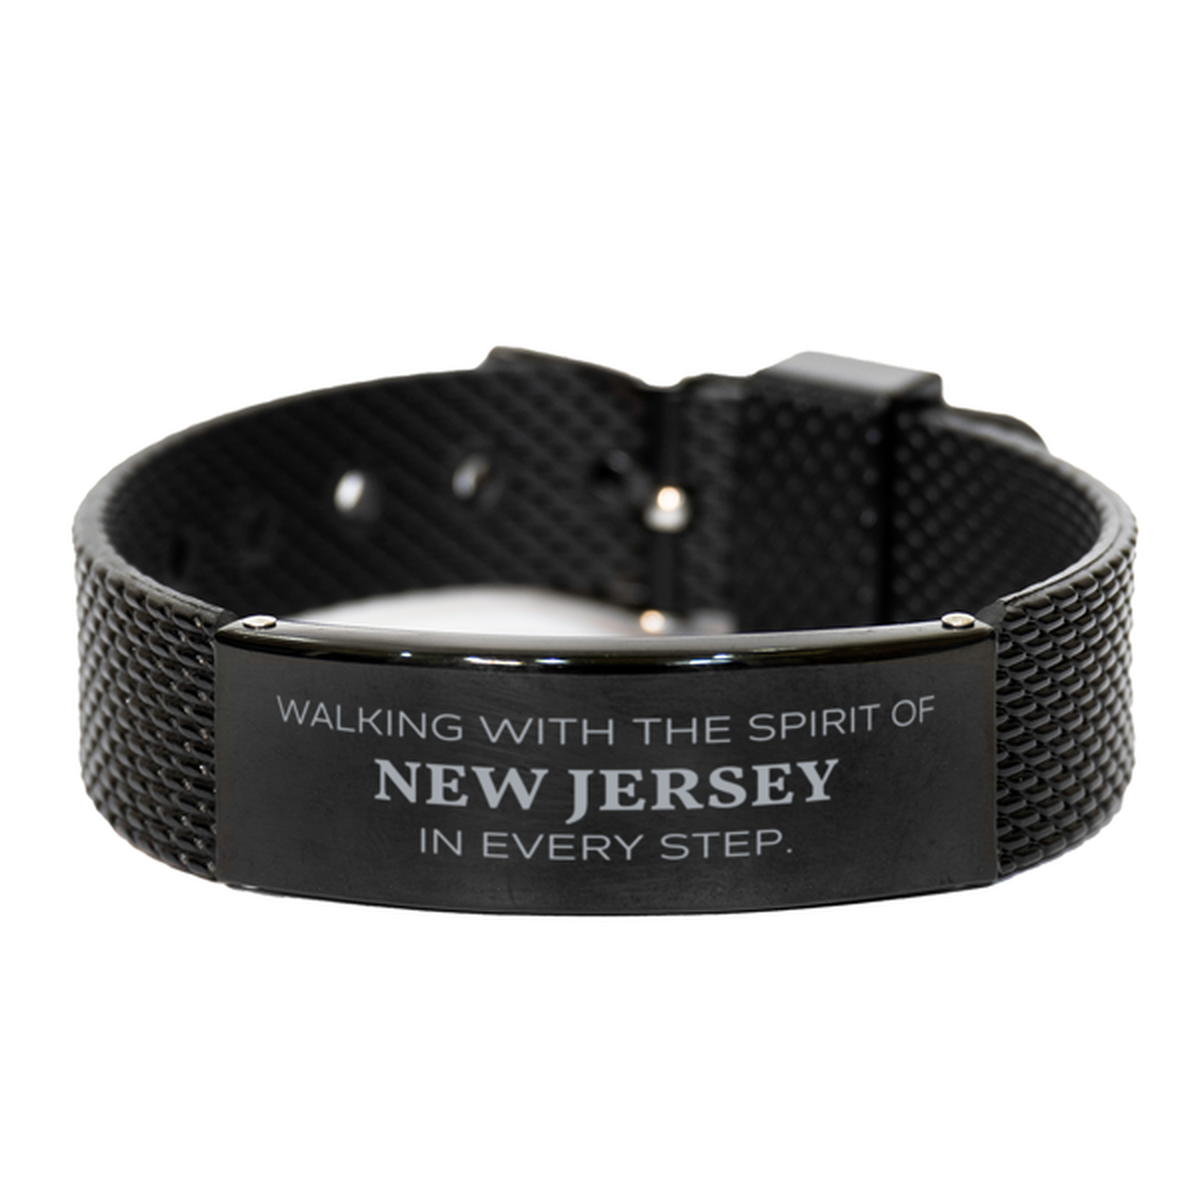 New Jersey Gifts, Walking with the spirit, Love New Jersey Birthday Christmas Black Shark Mesh Bracelet For New Jersey People, Men, Women, Friends